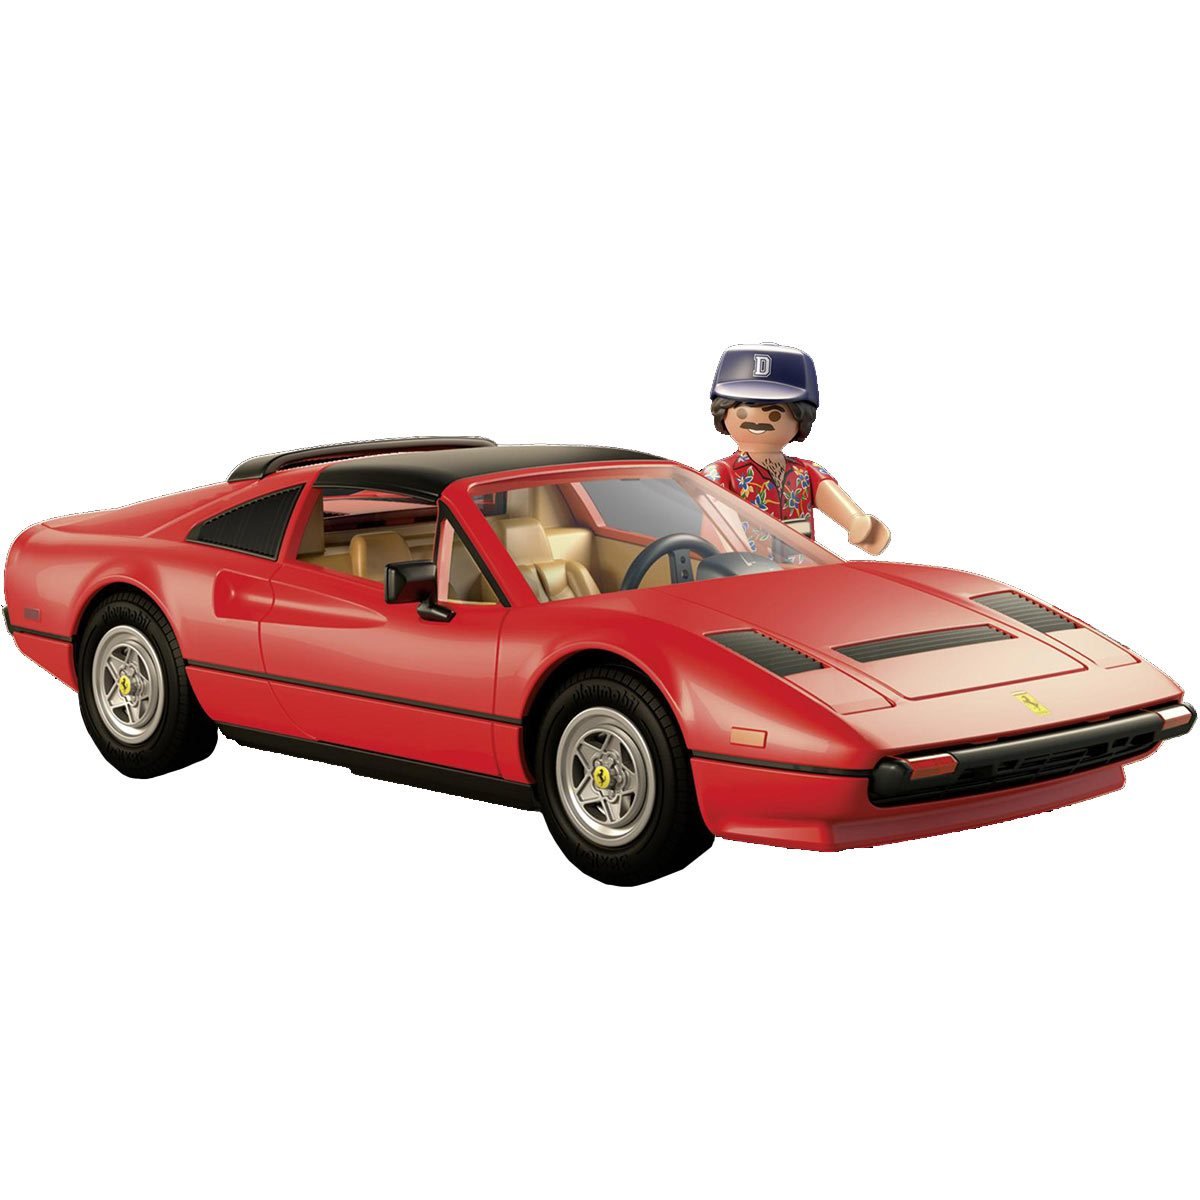 Vinny's Diecast & More on Instagram: Playmobil Magnum, p.i. Ferrari 308  GTS Quattrovalvole 71343/5-99. Glad to have added this classic 80's TV  series one along with the A-team and Knight Rider. Which